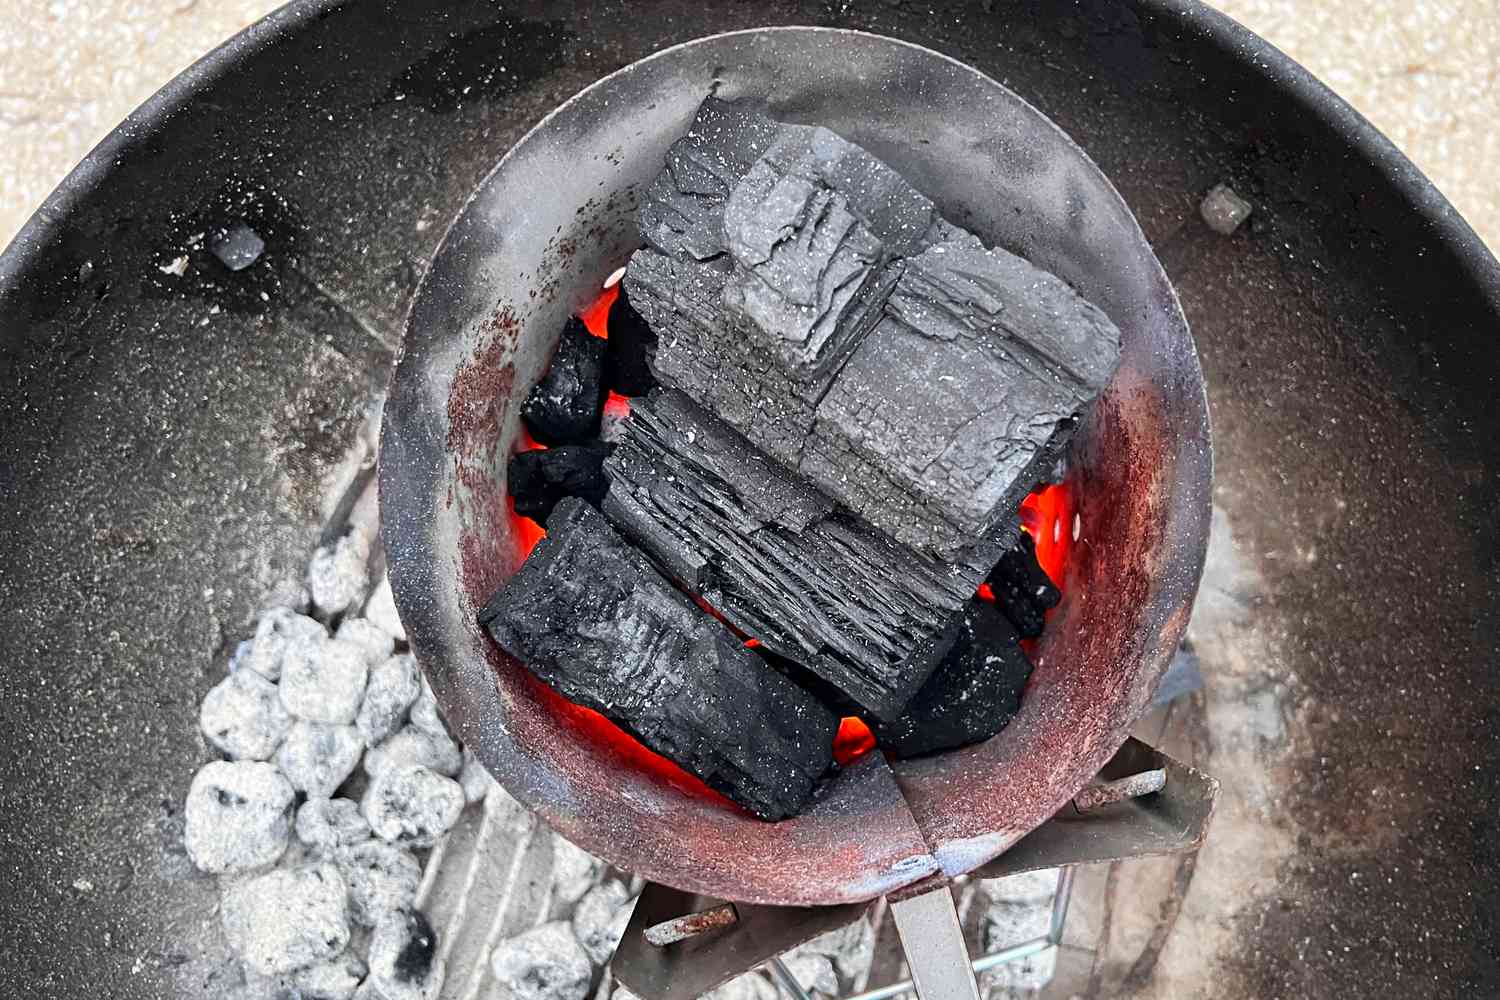 Masterbuilt lump charcoal burning in a grill